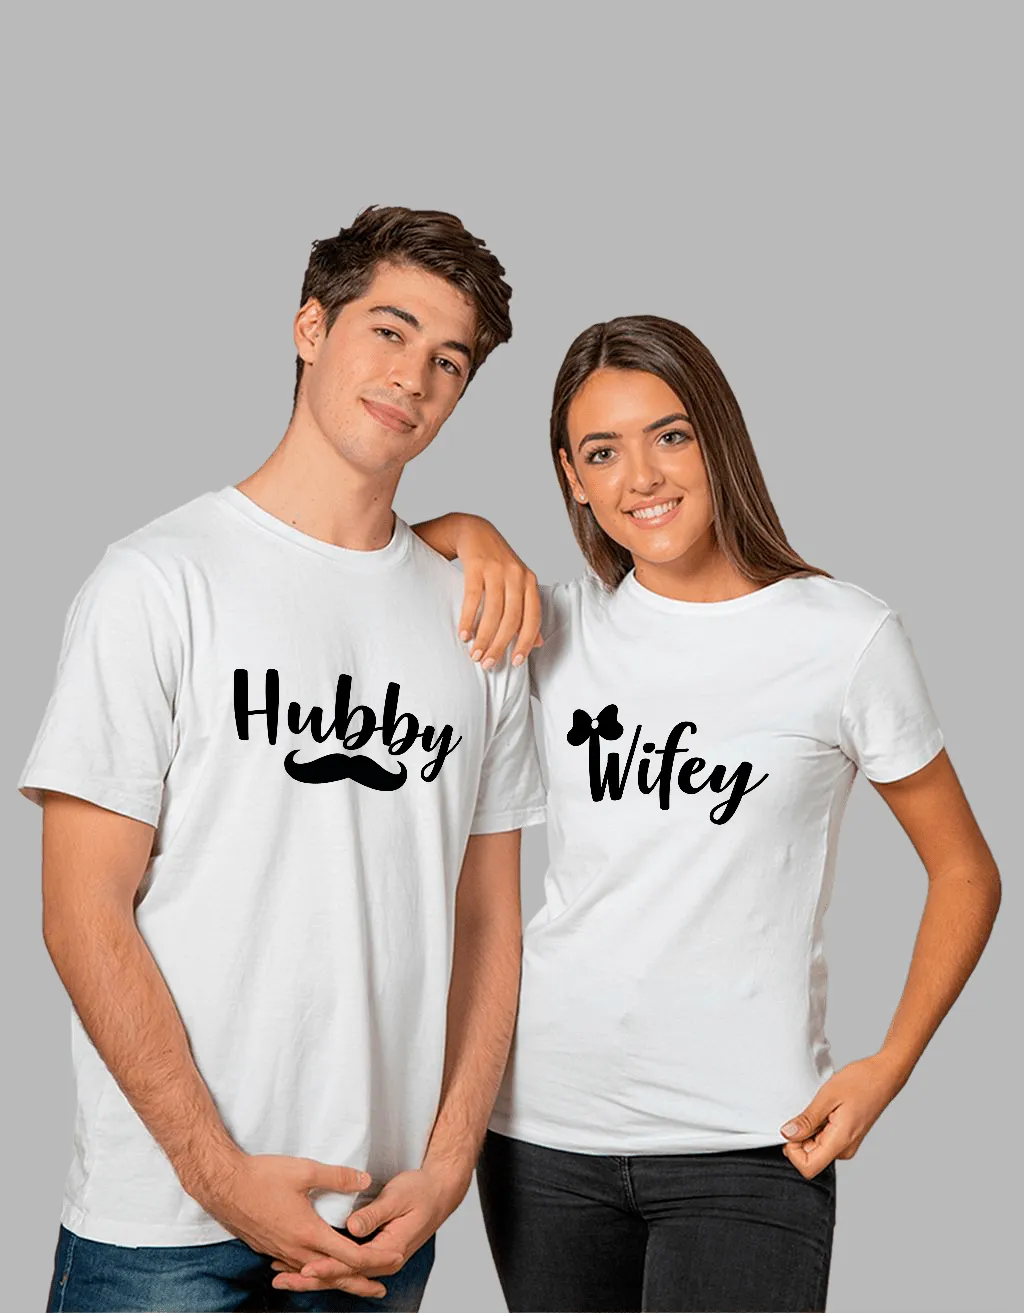 Wifey shirts Couples | Anniversary Gifts For Husband and Wife